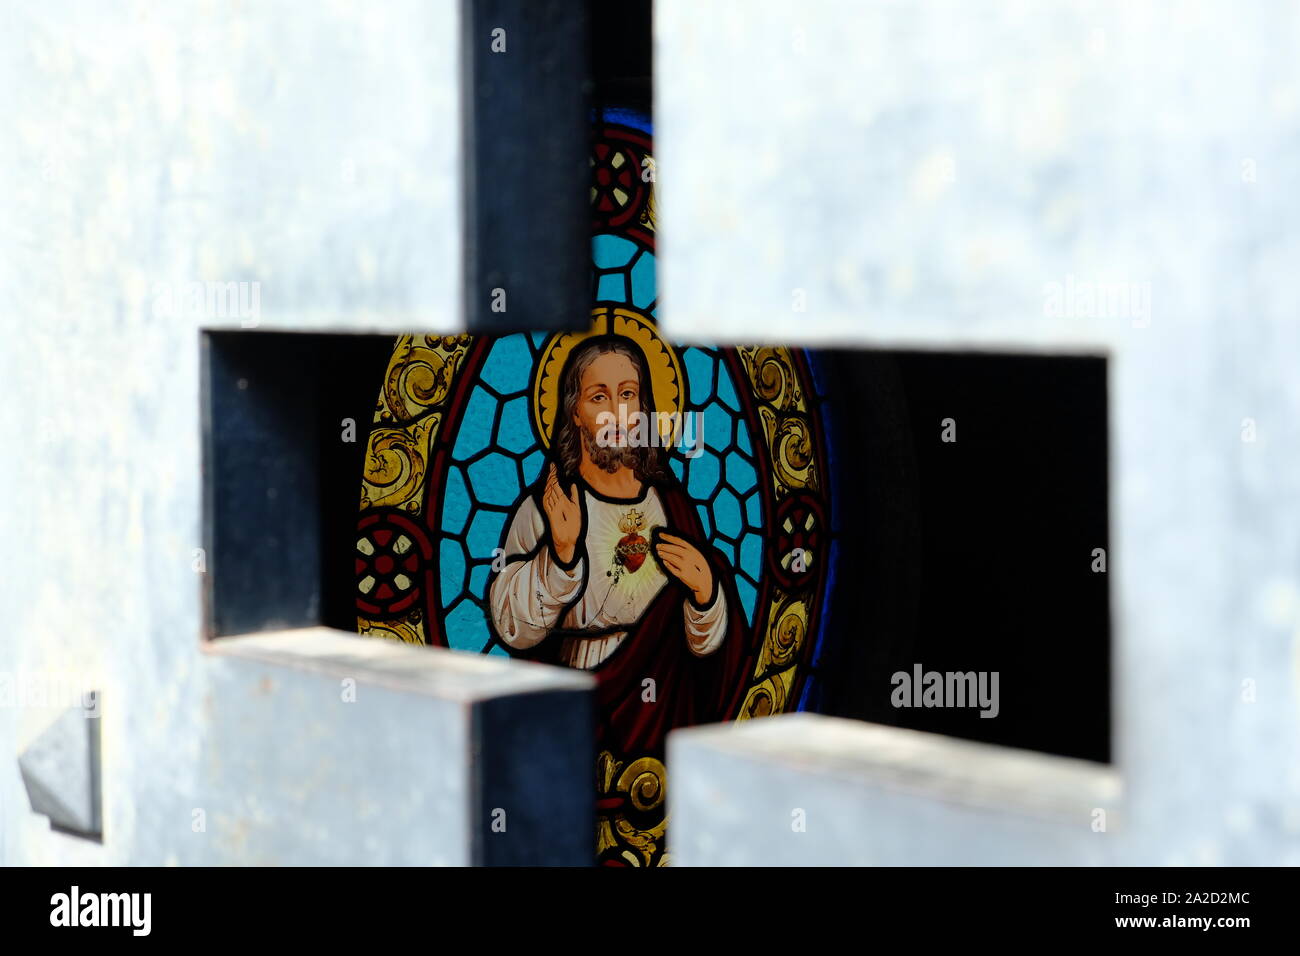 Argentina Buenos Aires Jesus Christus stained glass window framed by a cross Stock Photo